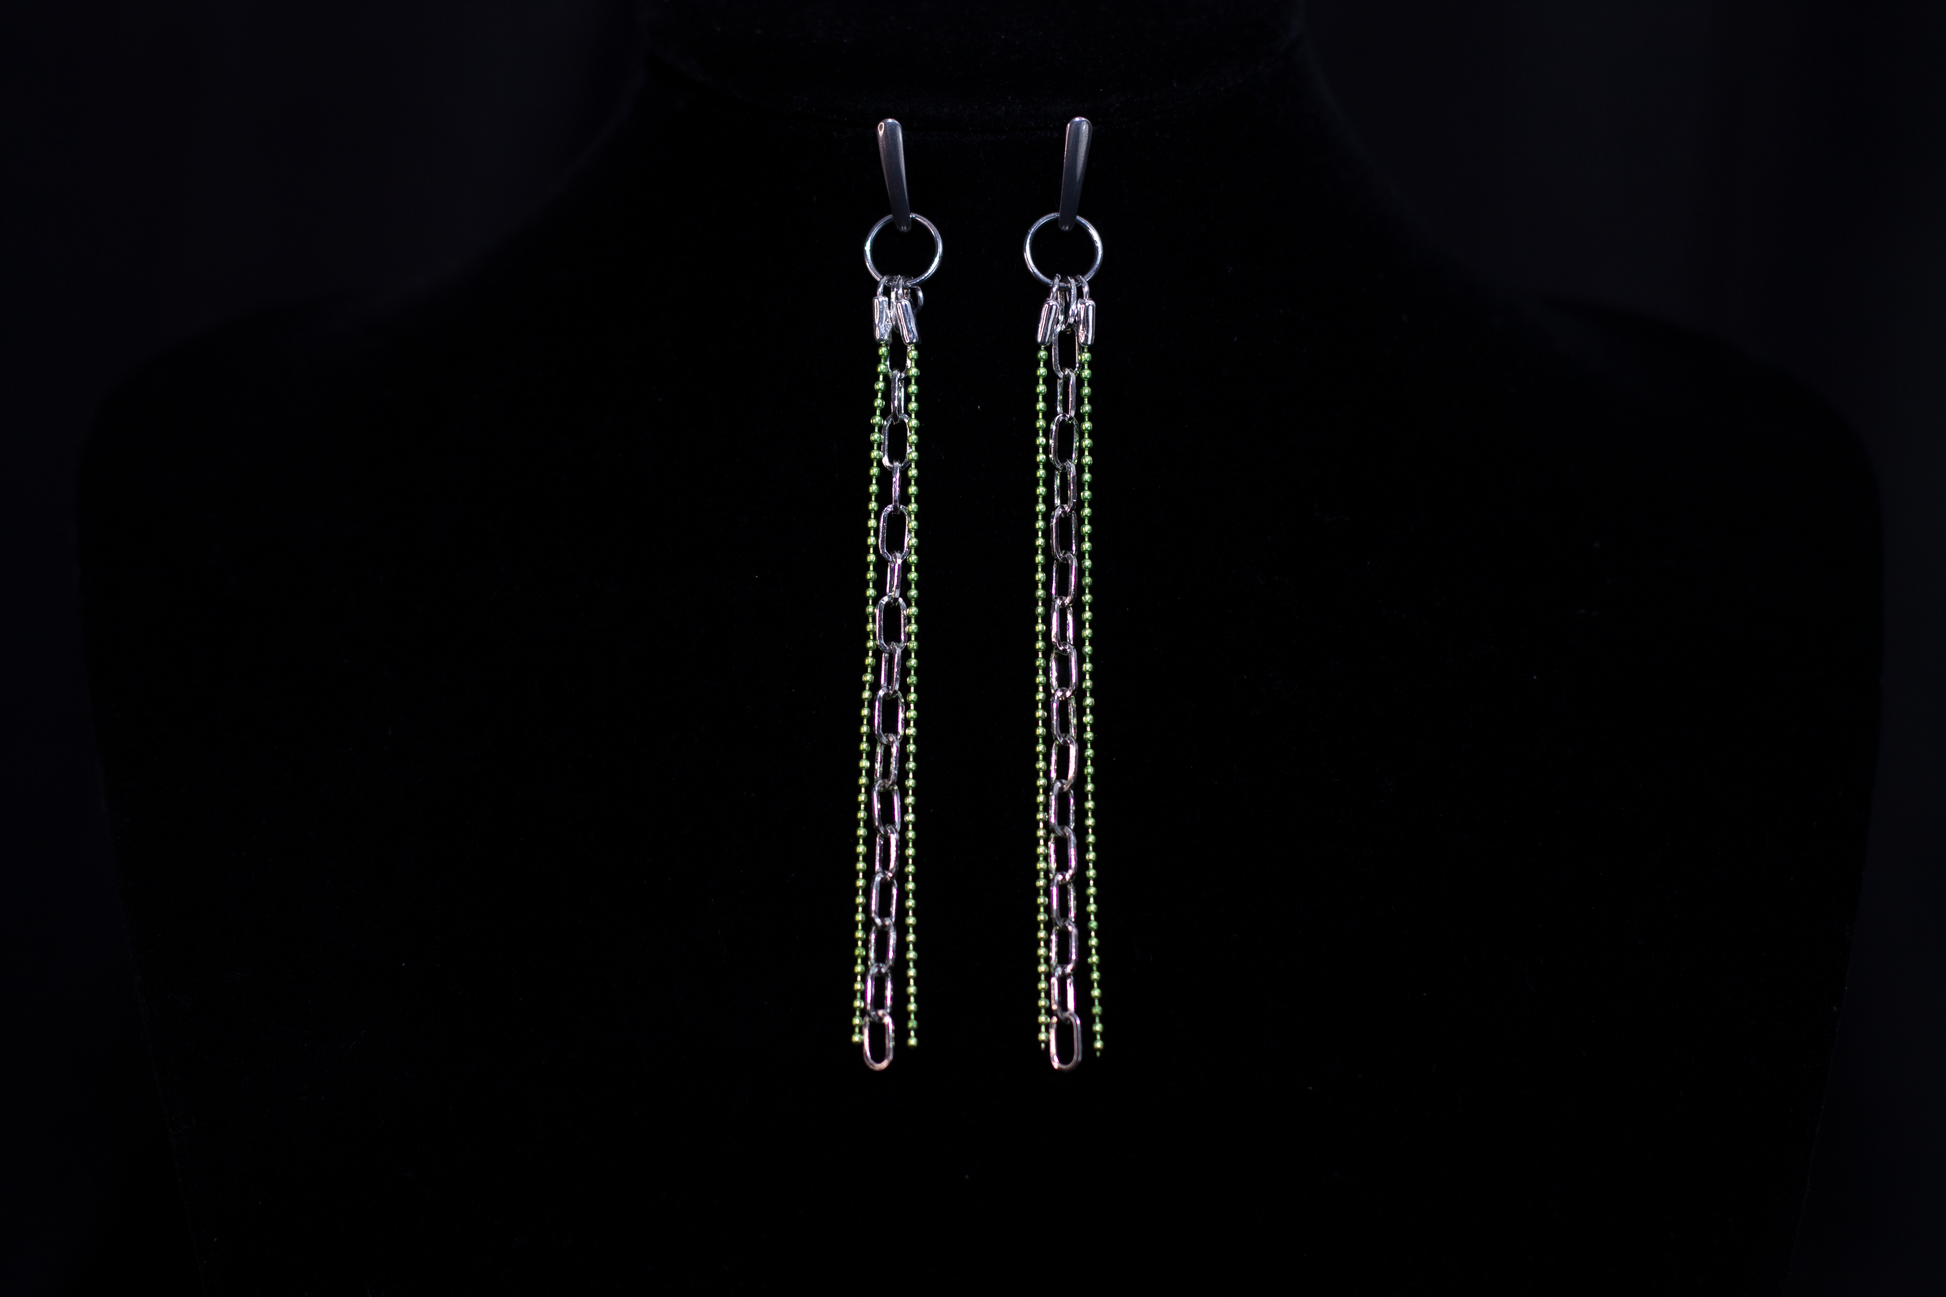 These Myril Jewels earrings showcase a neo-gothic allure, perfect for those embracing a dark-avantgarde style. The design features elongated chains adorned with shimmering green beads, reflecting an edgy yet chic aesthetic. Ideal for goth girlfriend gifts or as bold, festival-ready accessories, these earrings exude a minimalist goth vibe that complements both everyday wear and Halloween festivities.